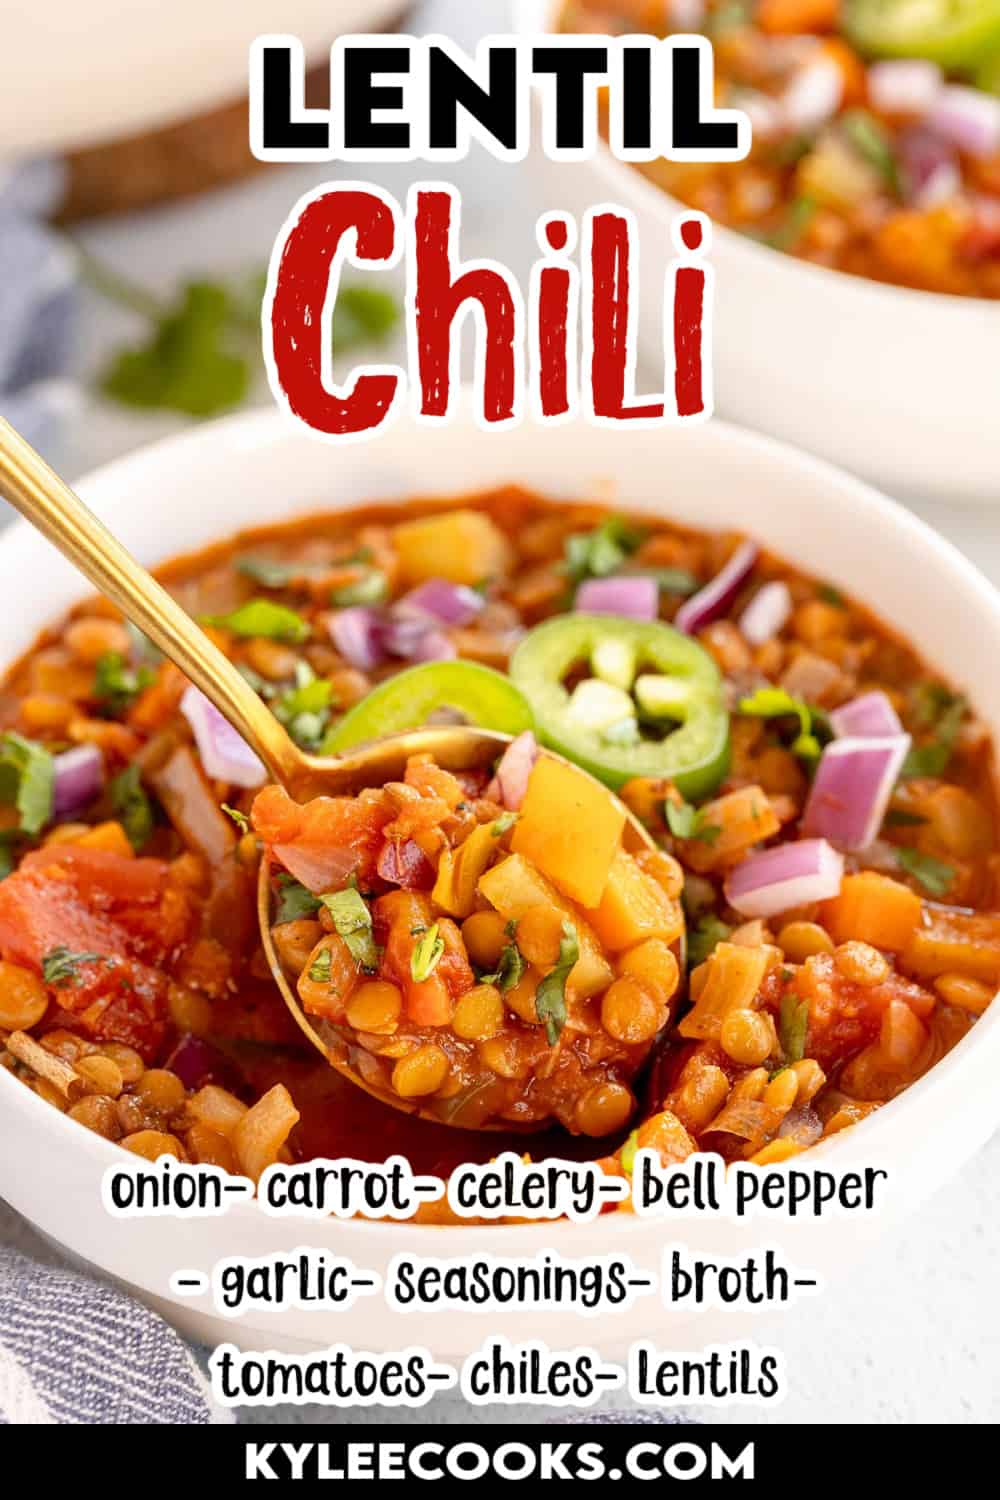 lentil chili in a white bowl with recipe name and ingredients overlaid in text.